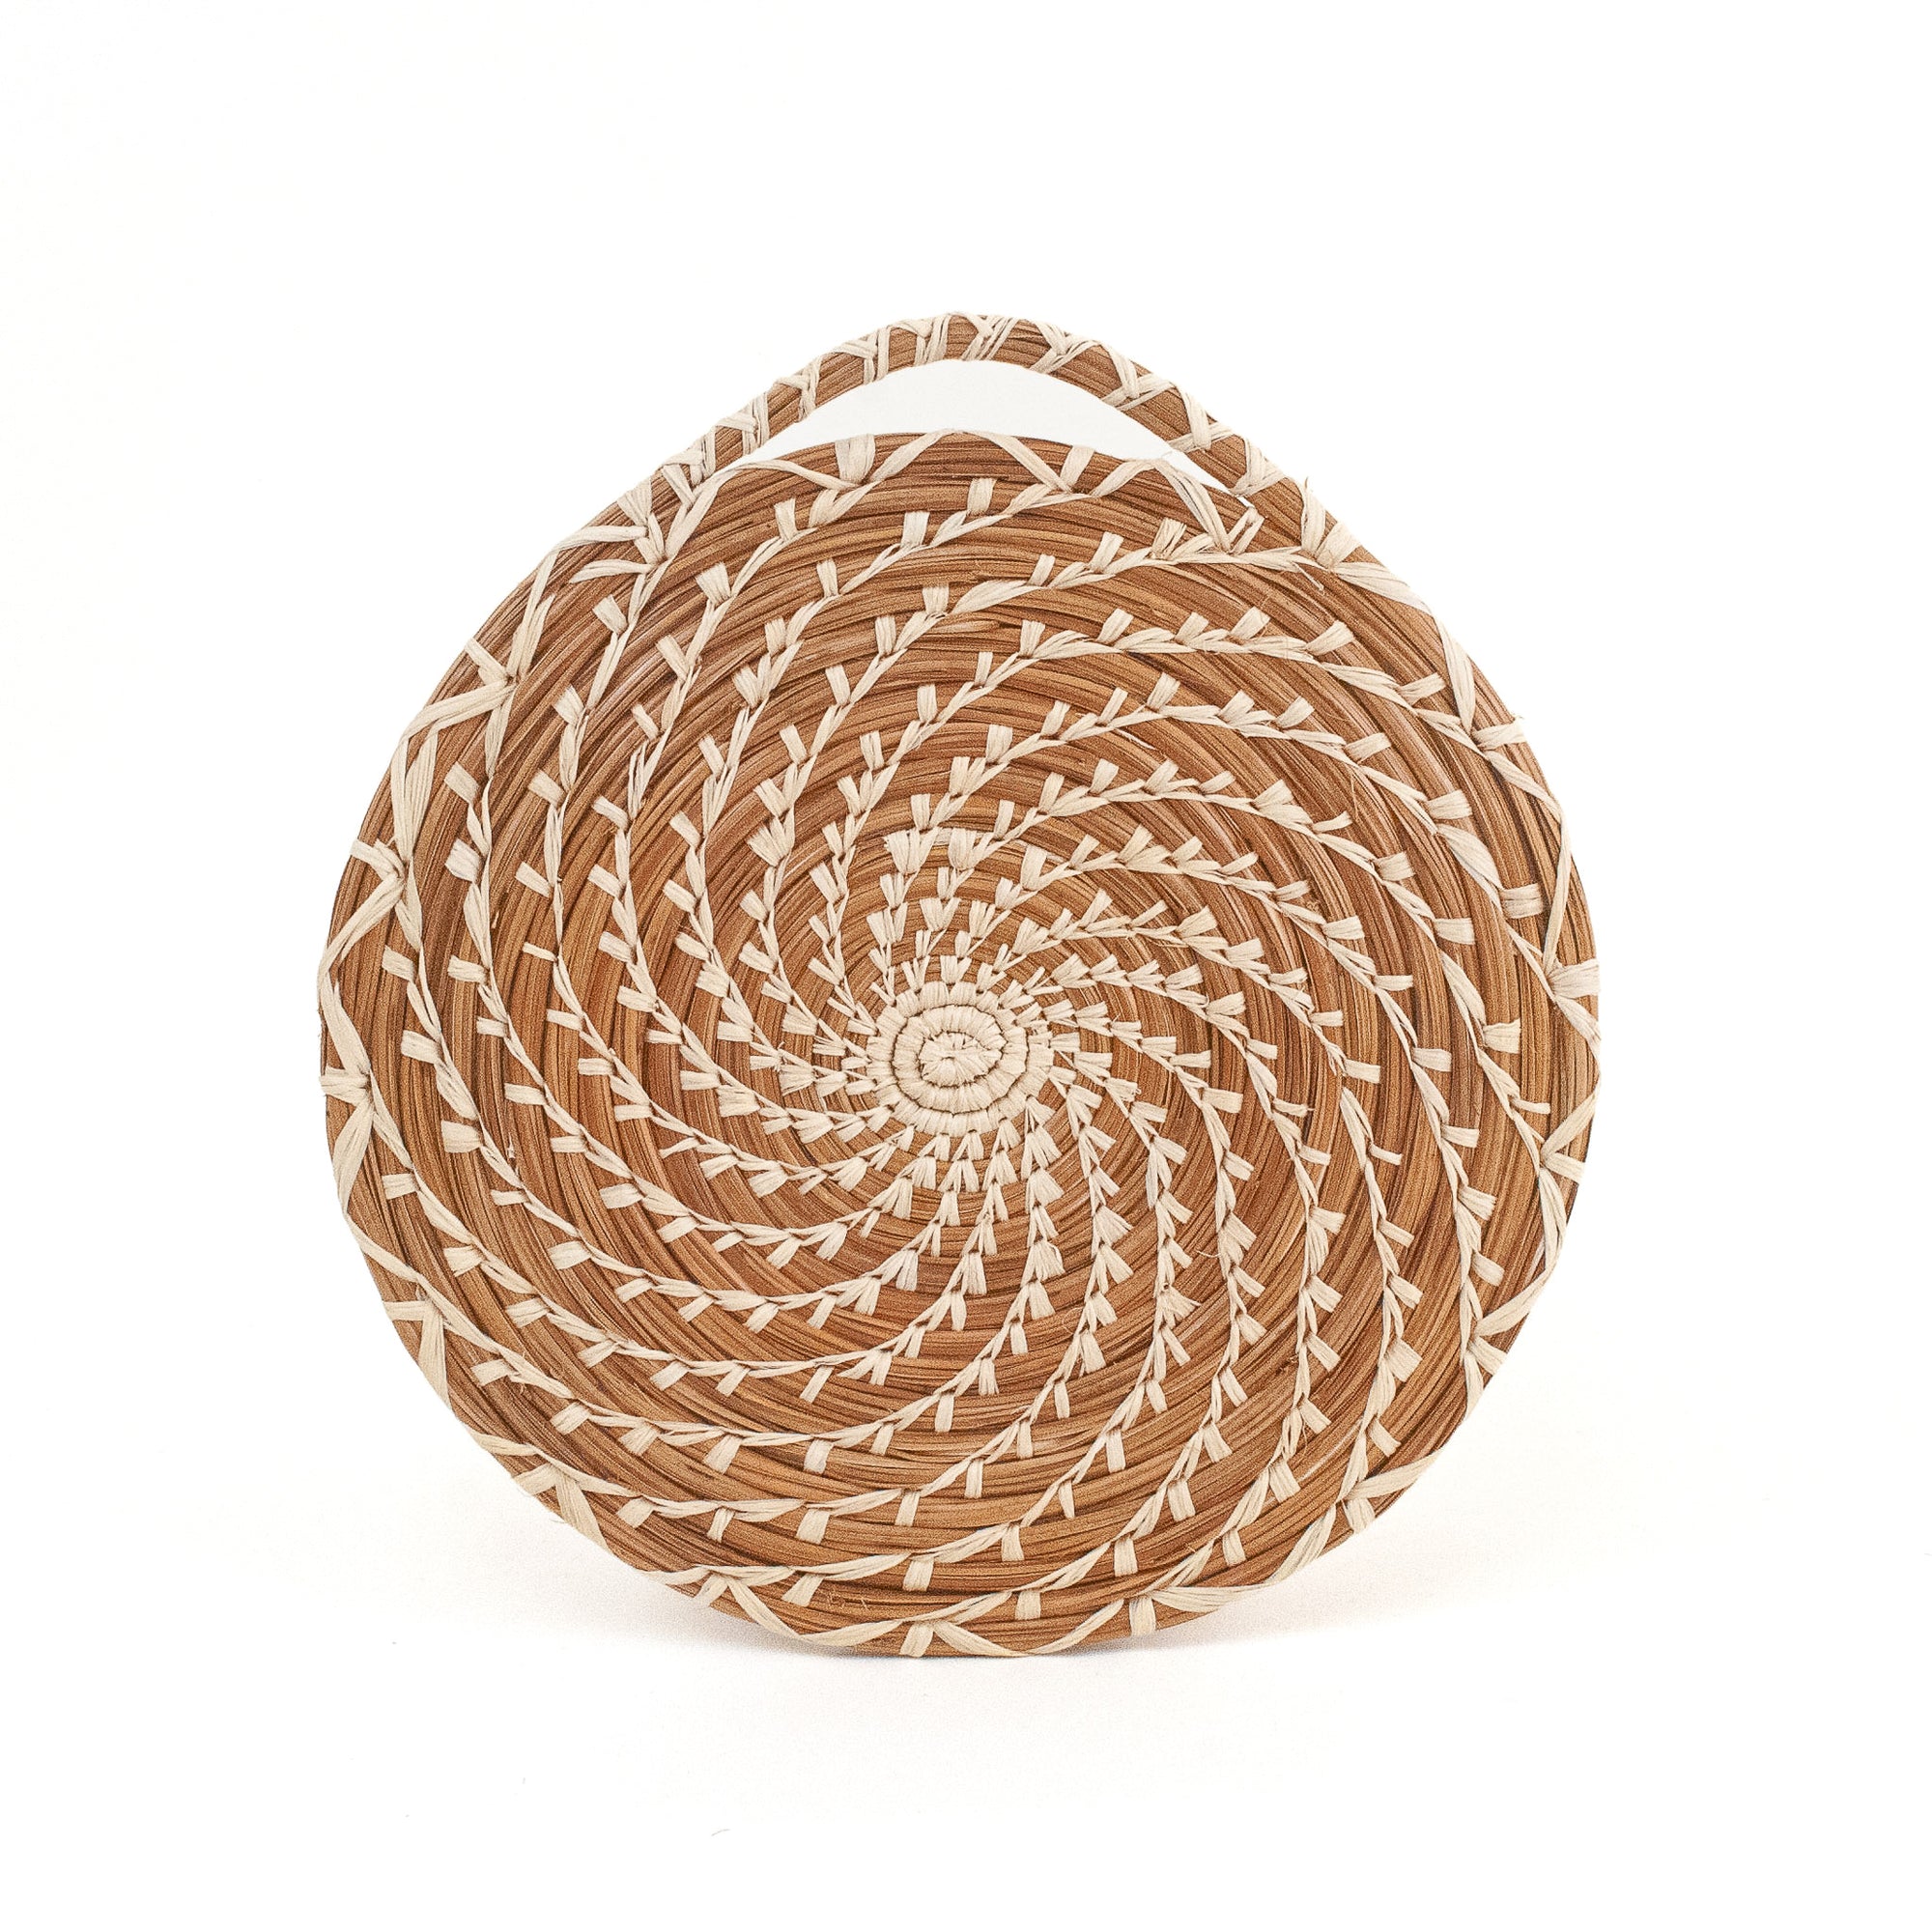 Group of three hanging pine needle trivets